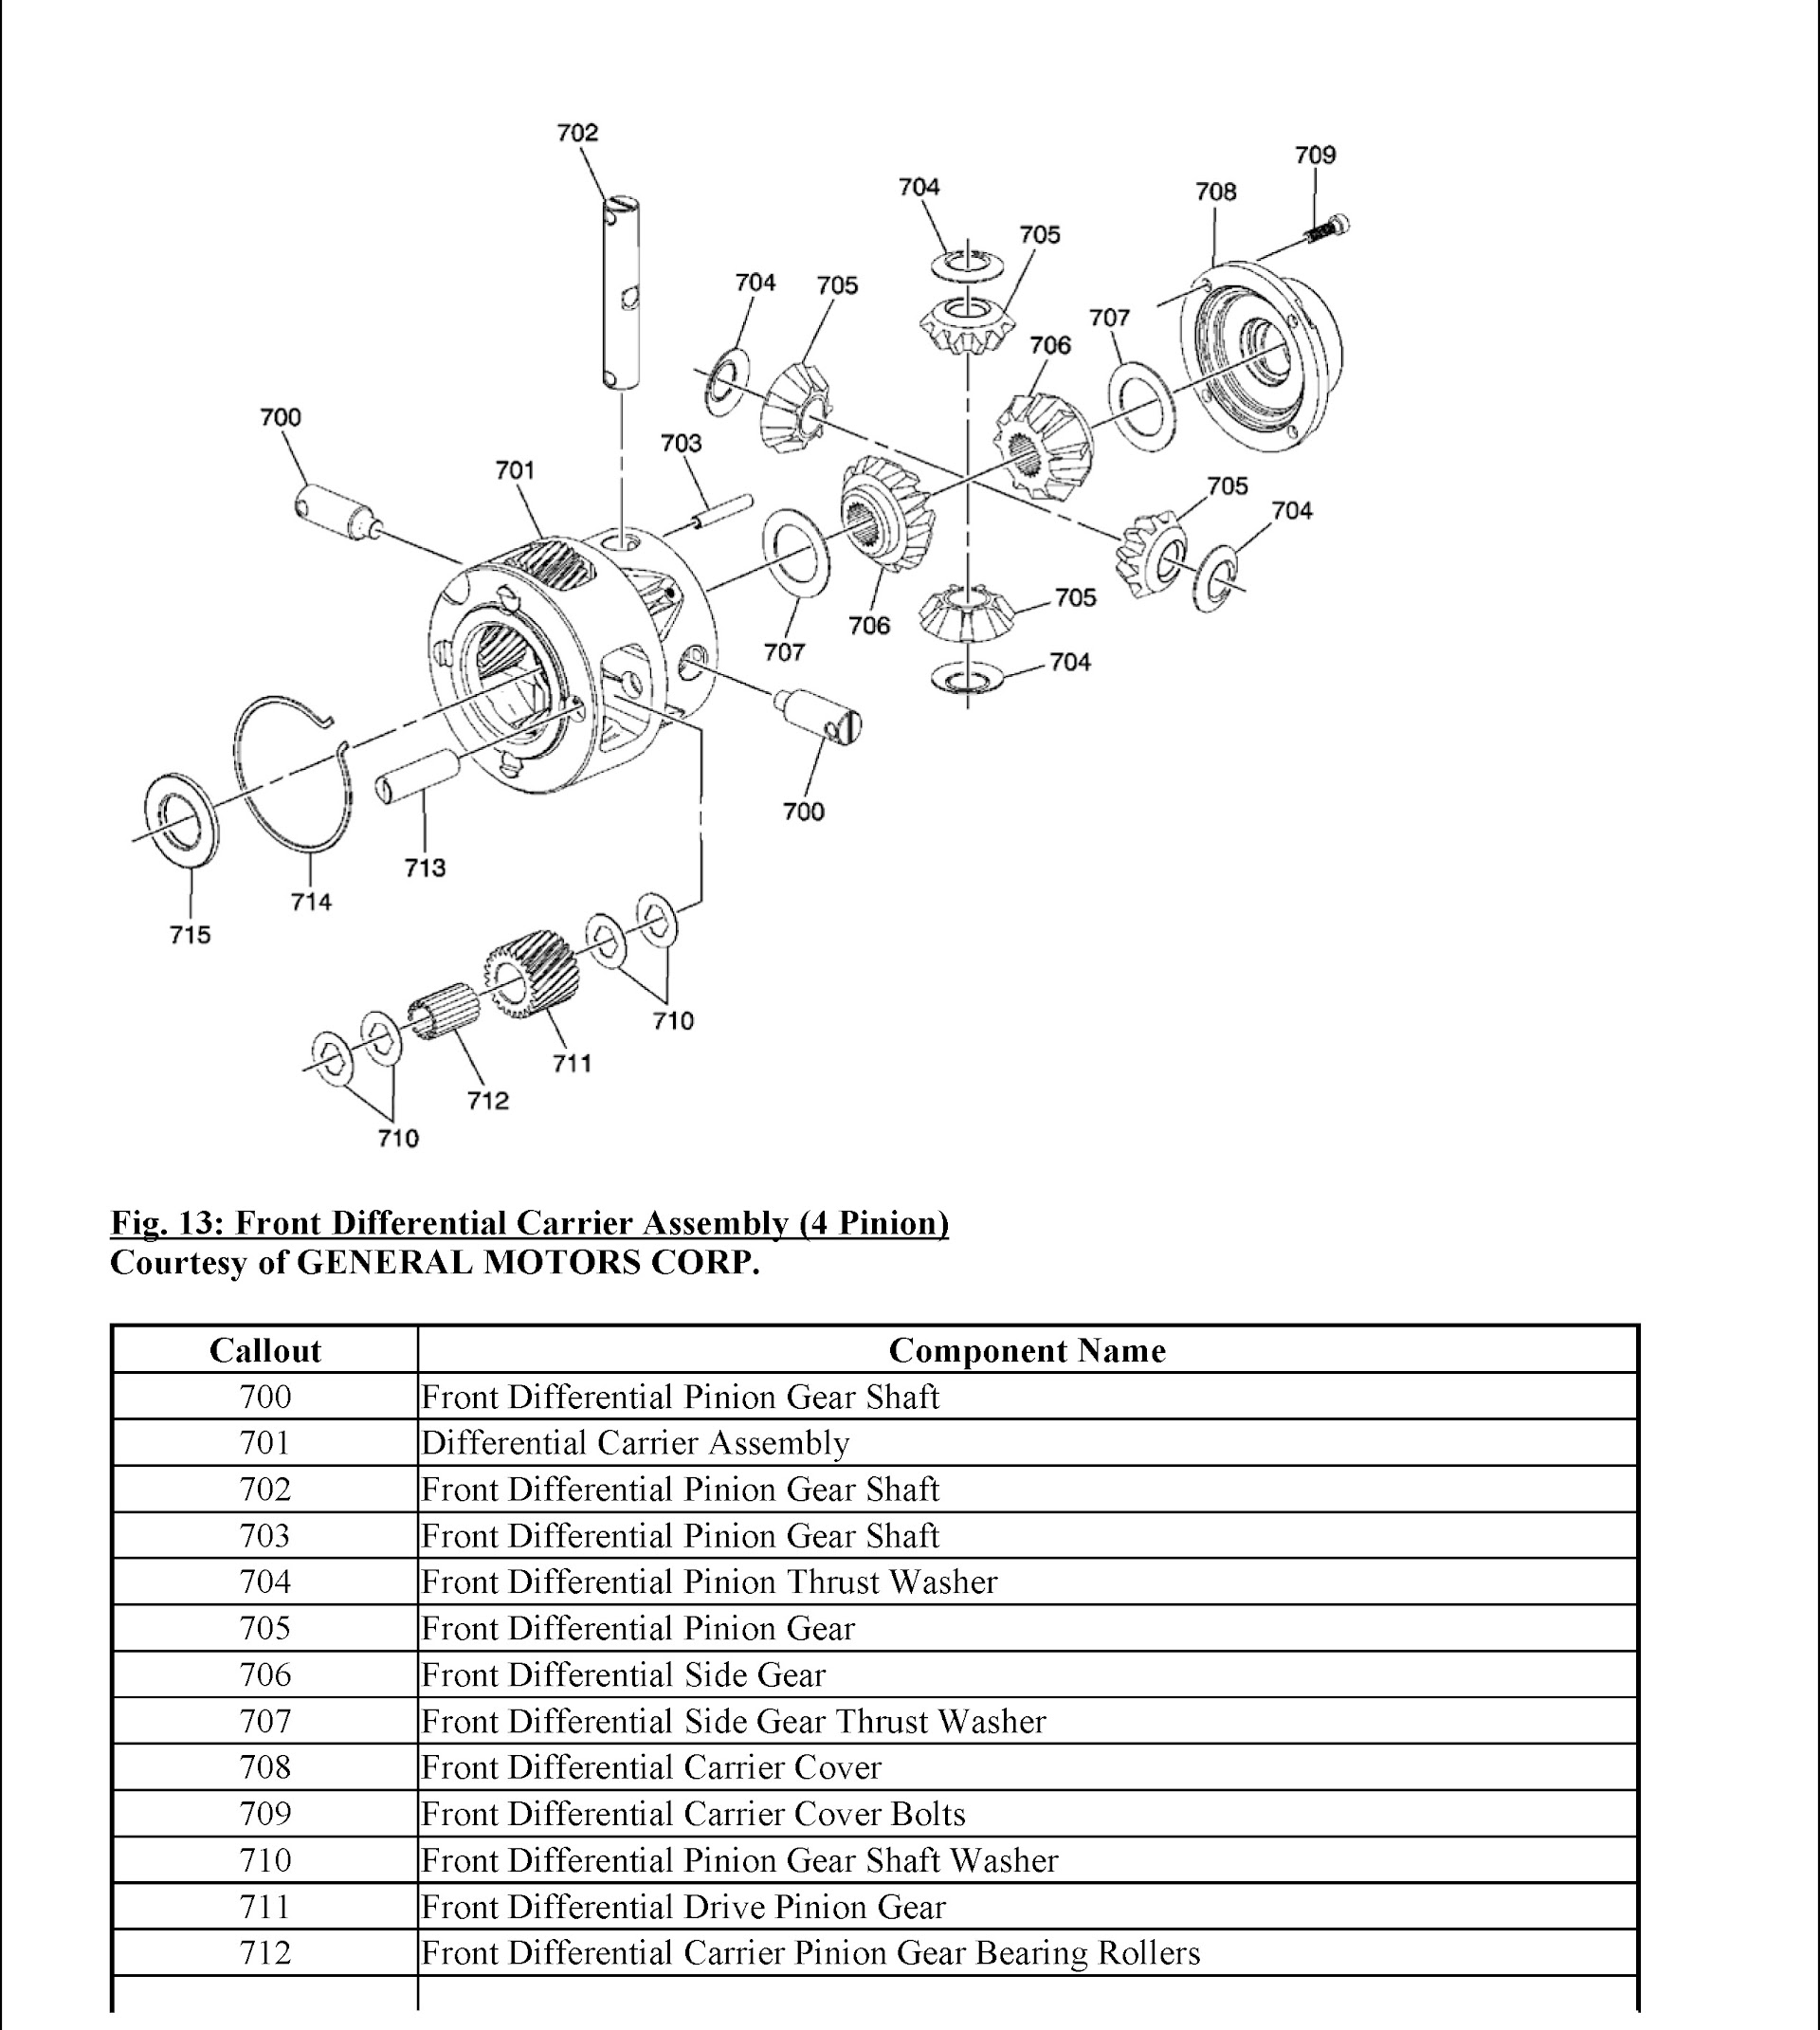 CONTENTS: 2010-2012 Chevrolet Equinox Repair Manual and GMC Terrain, Front Differential Carrier Assembly